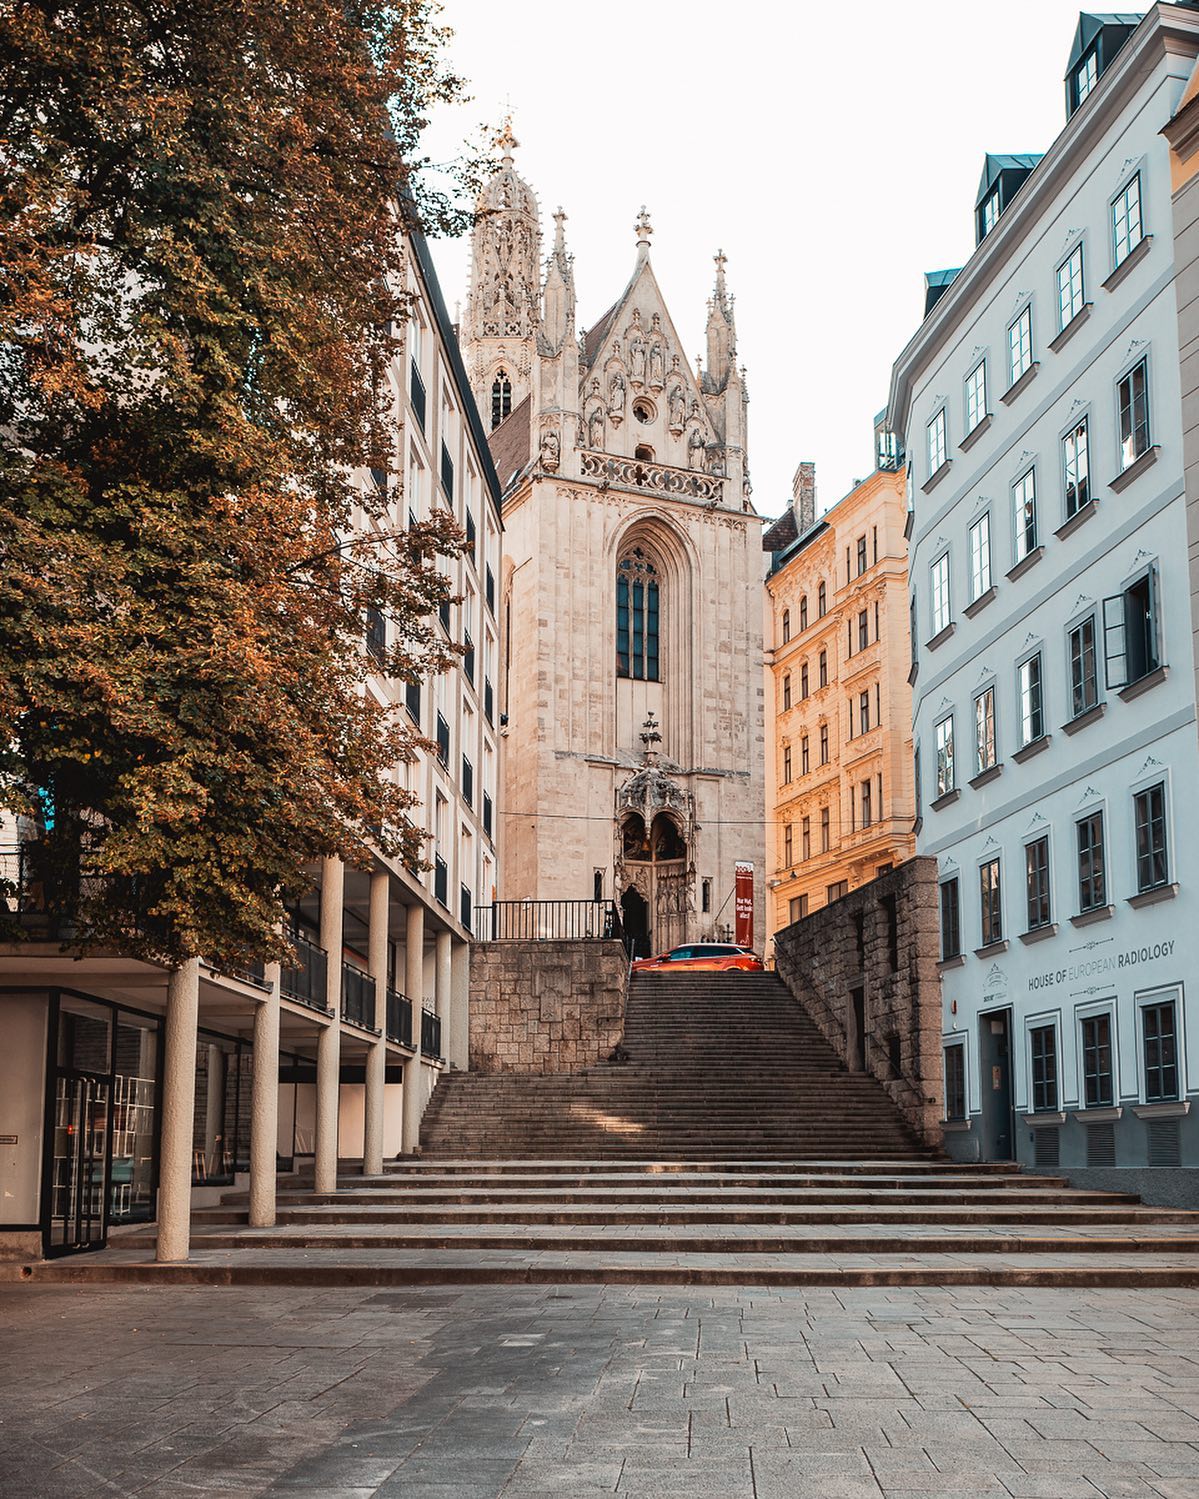 Maria Am Gestade Church, one of the most instagrammable places in Vienna, Austria